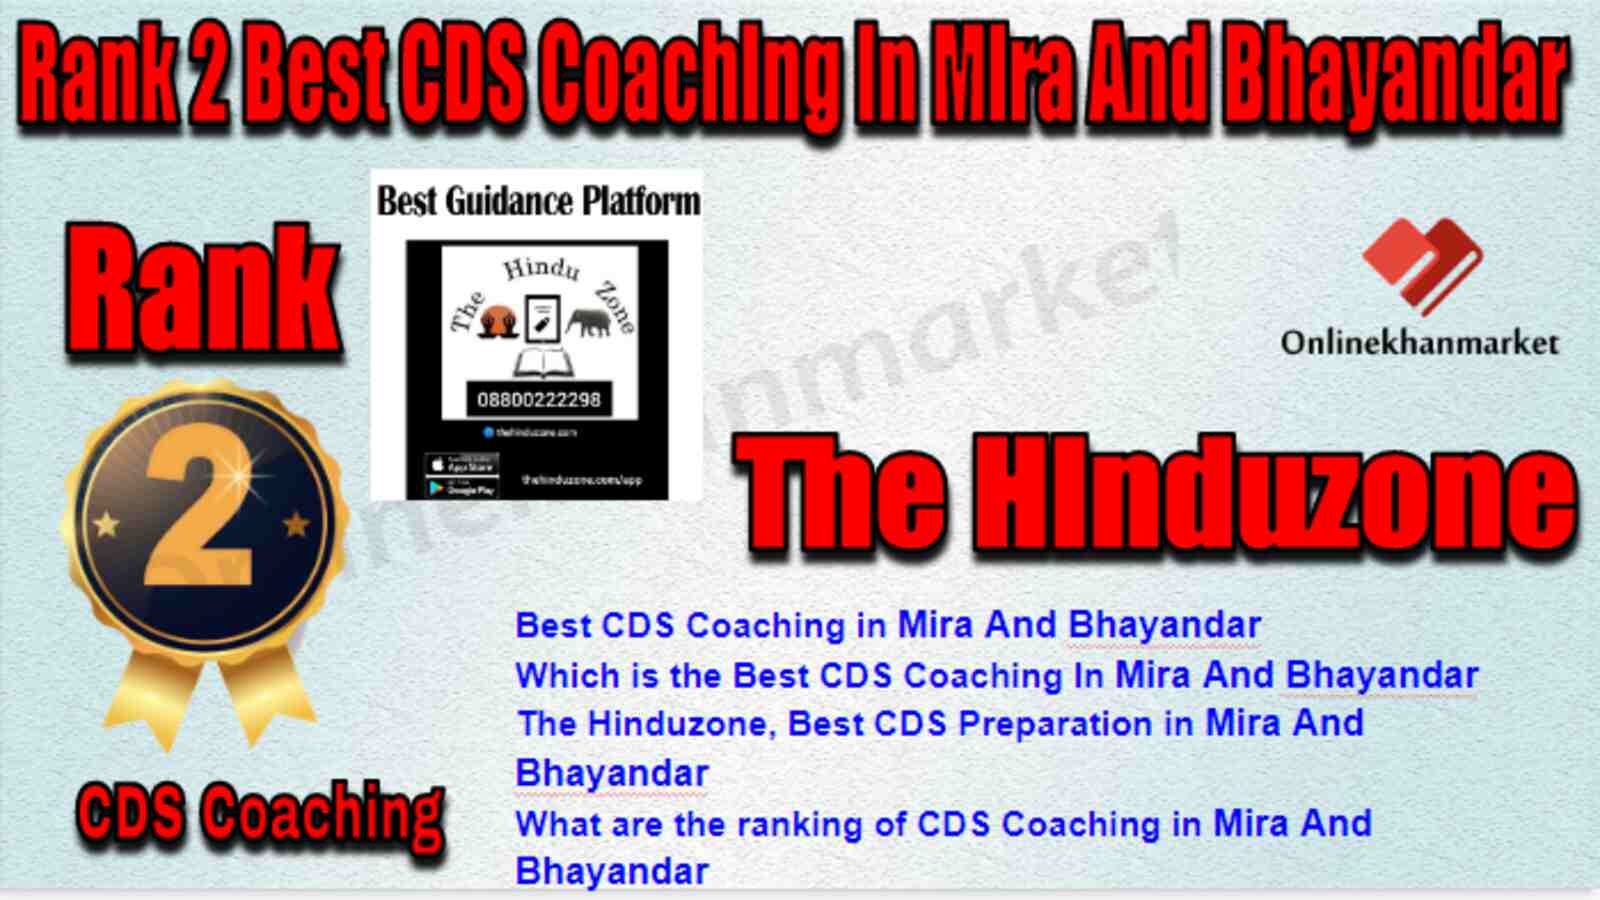 Rank 2 Best CDS Coaching in Mira and Bhayandar